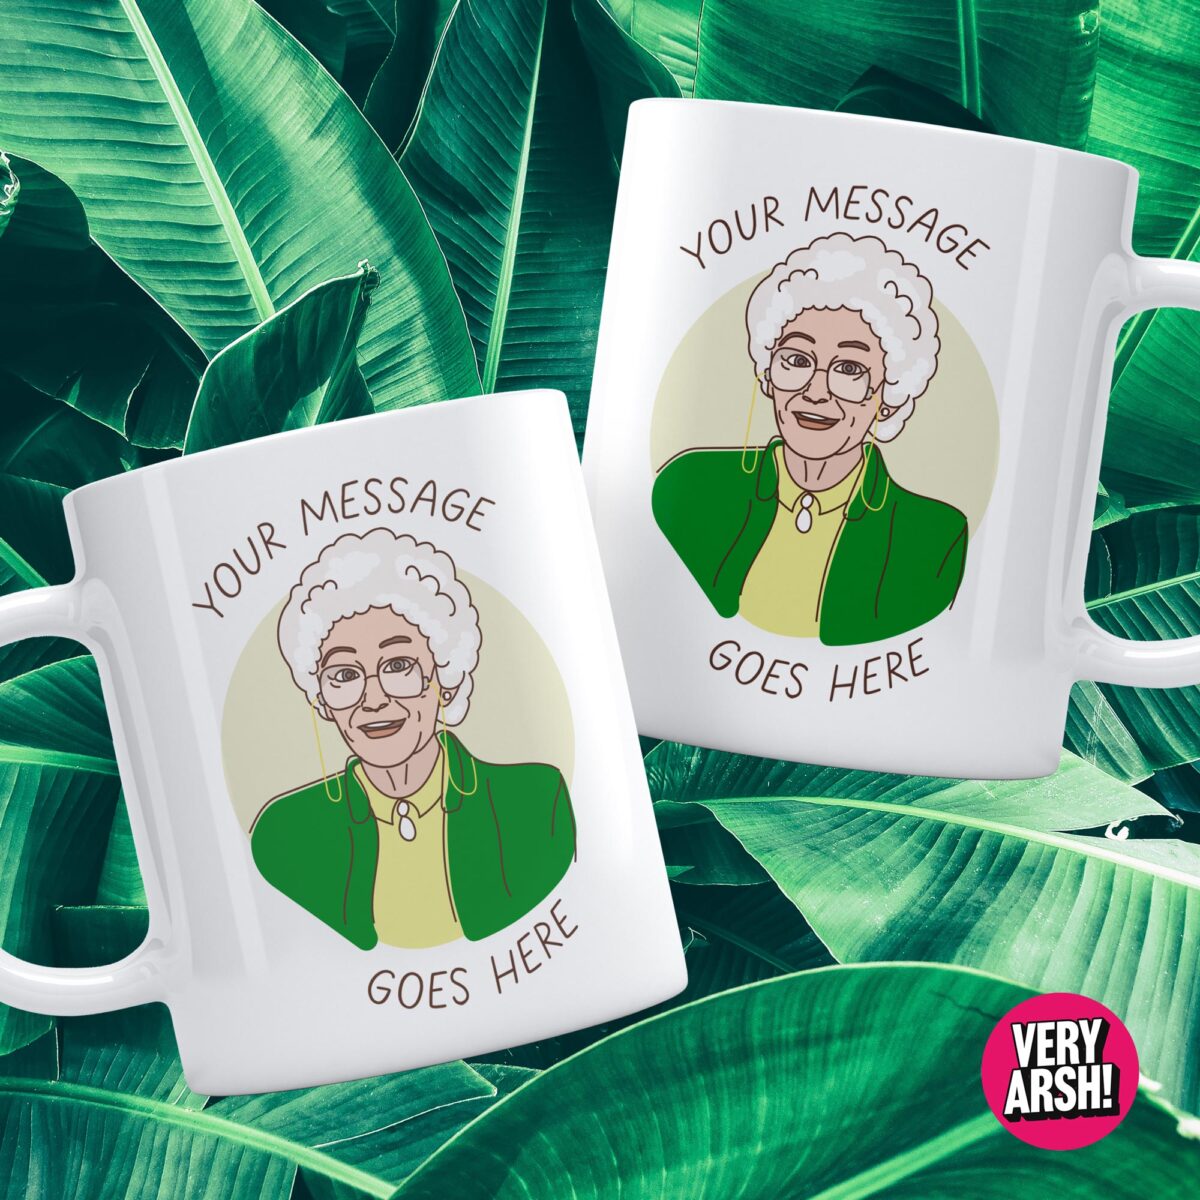 Sophia Personalised Mug inspired by The Golden Girls - Personalise with your own message